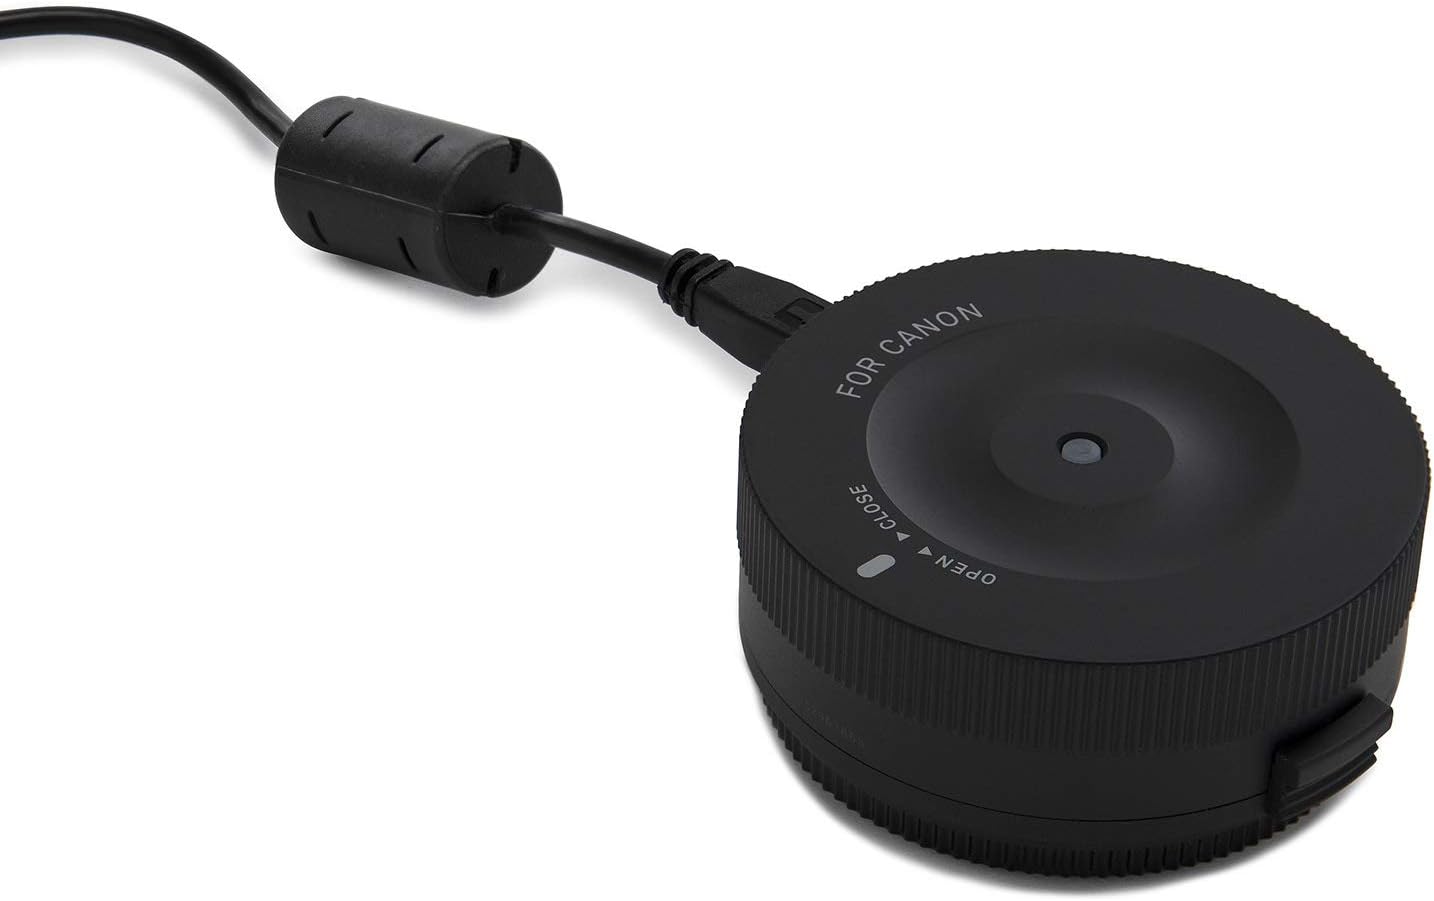 Sigma USB Dock for Canon